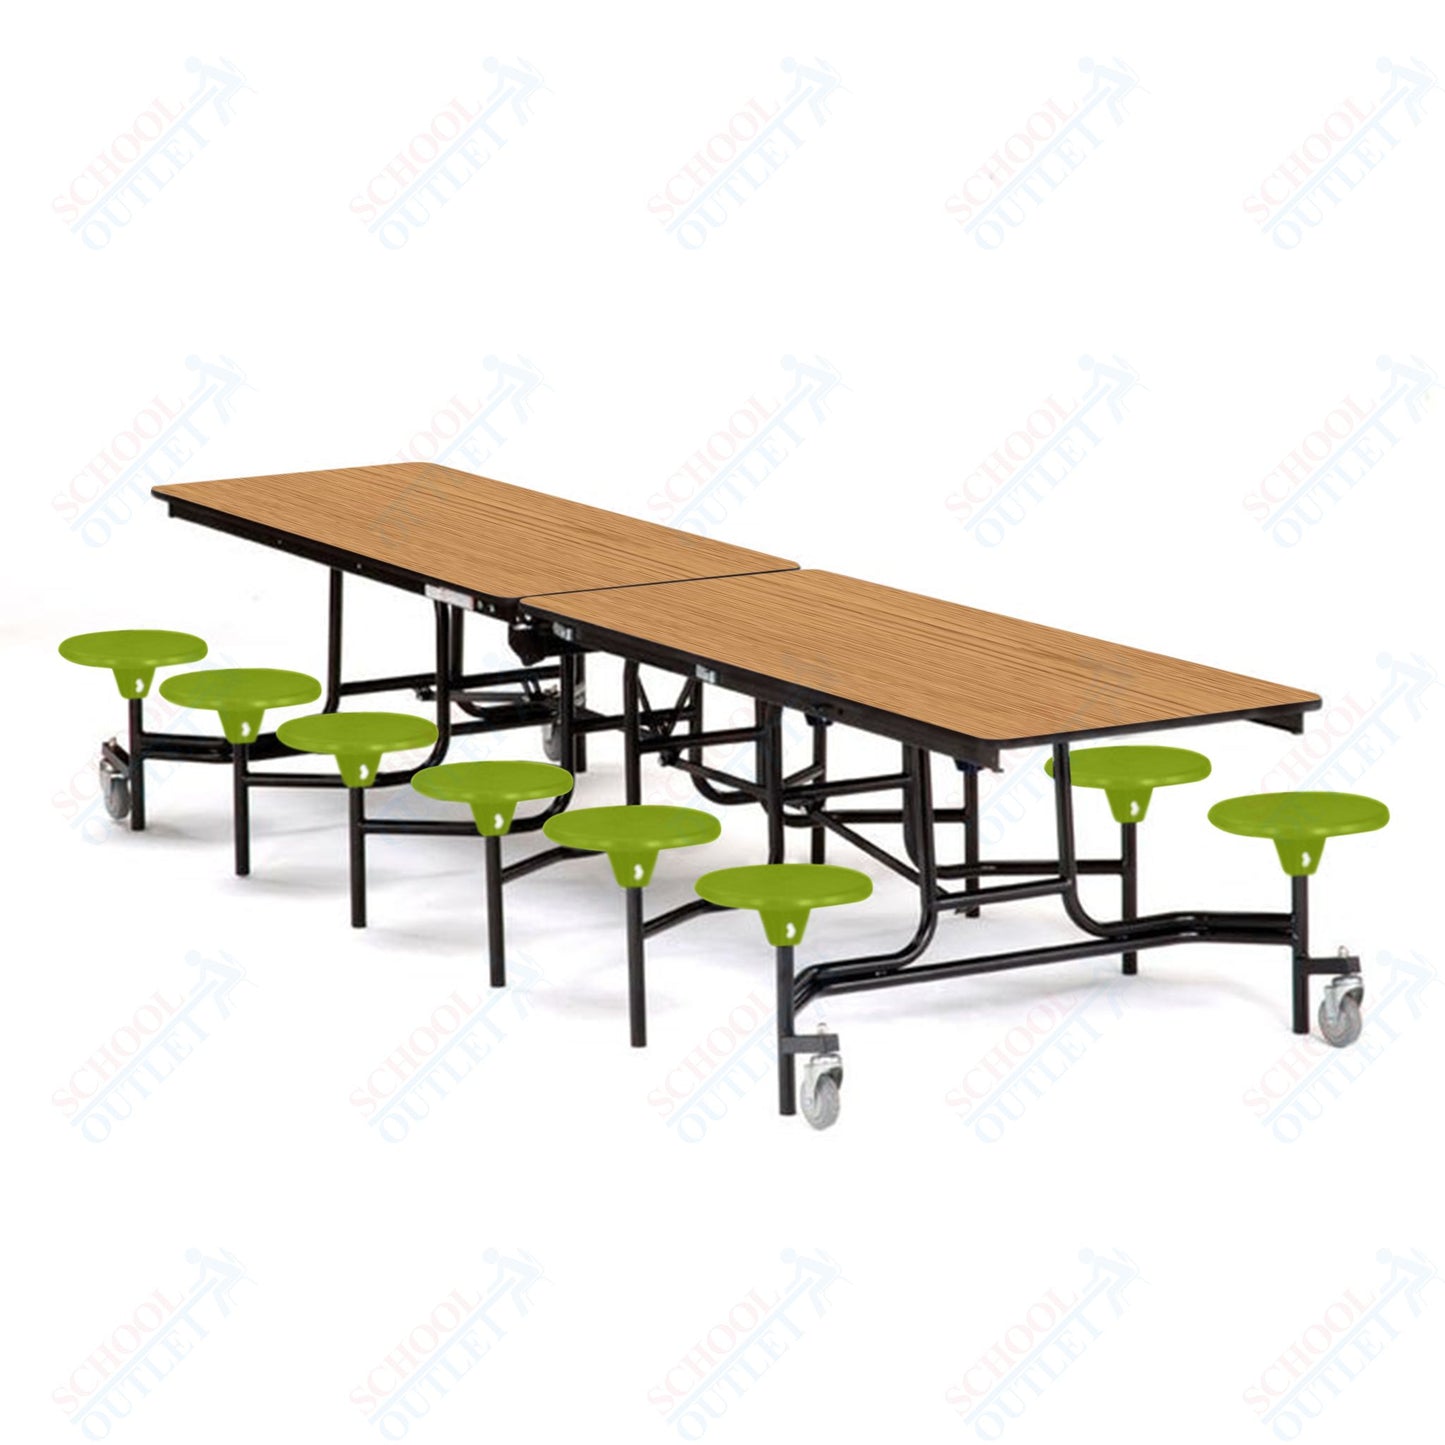 Mobile Cafeteria Lunchroom Stool Table - 30" W x 12' L - 12 Stools - Plywood Core - T-Molding Edge - Chrome Frame